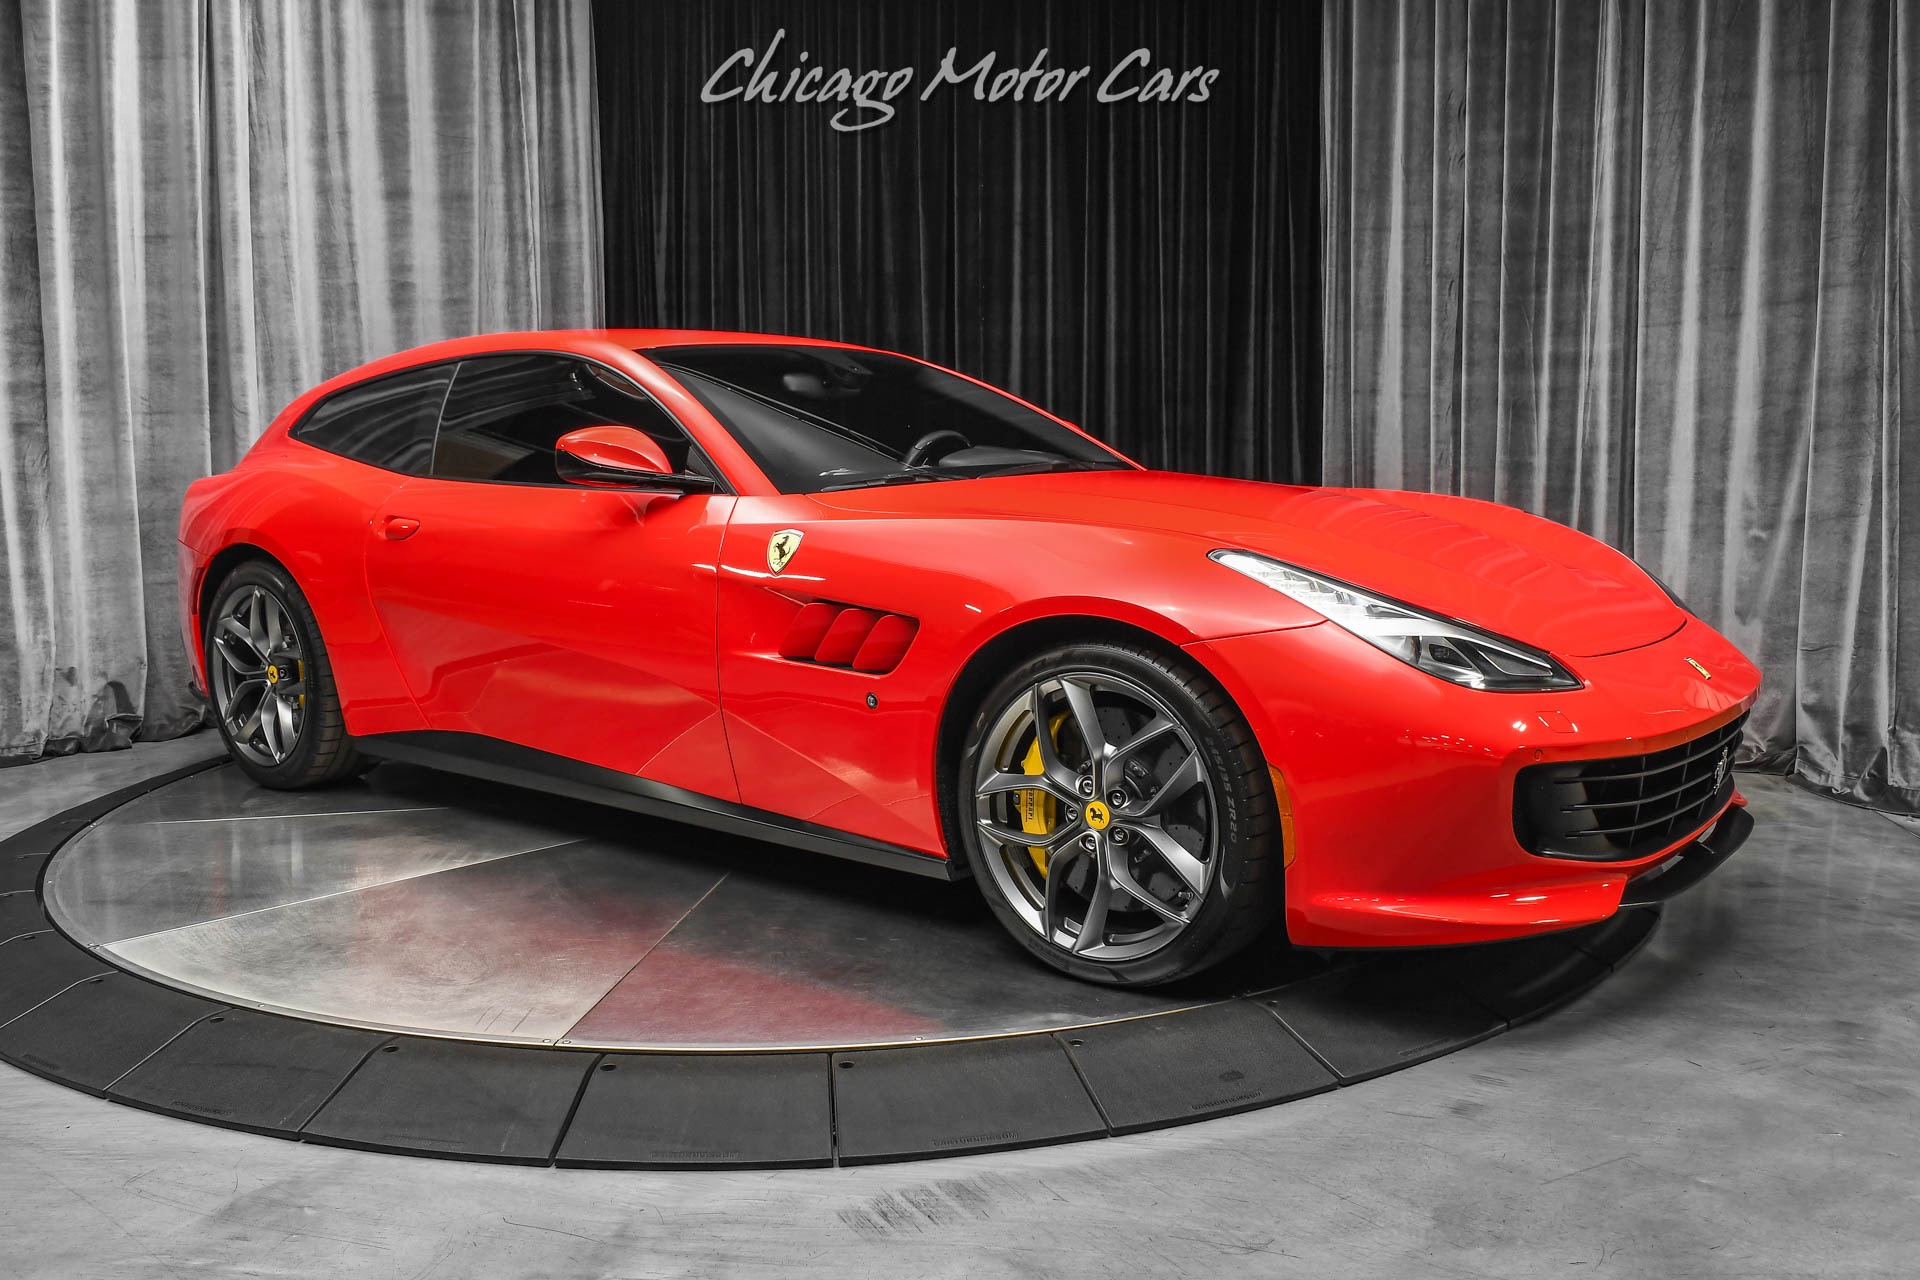 Used-2018-Ferrari-GTC4Lusso-T-Carbon-Driver-Zone-Passenger-Display-Front-Lift-Twin-Turbo